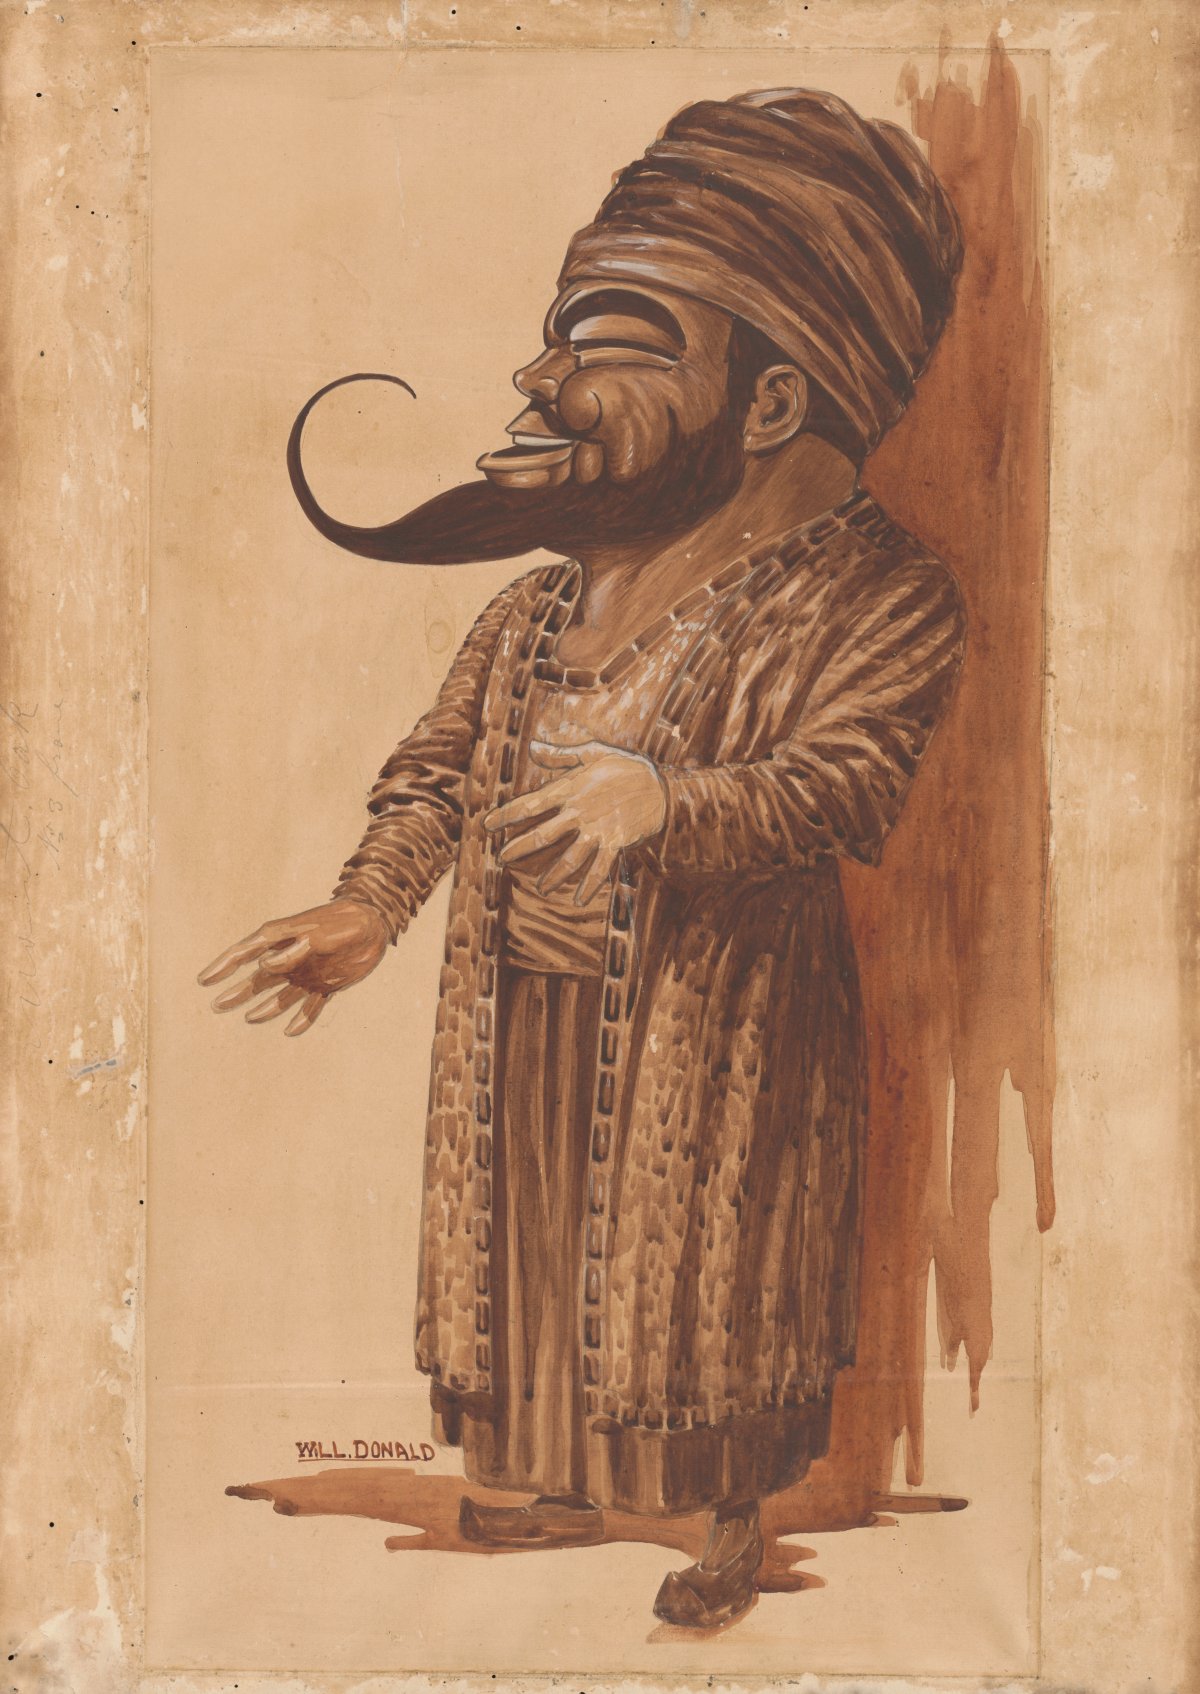 A caricature sketch of a man with a long pointy beard. He has an unusually large head and a small body. He is laughing. He is wearing a turban and a robe and slippers.